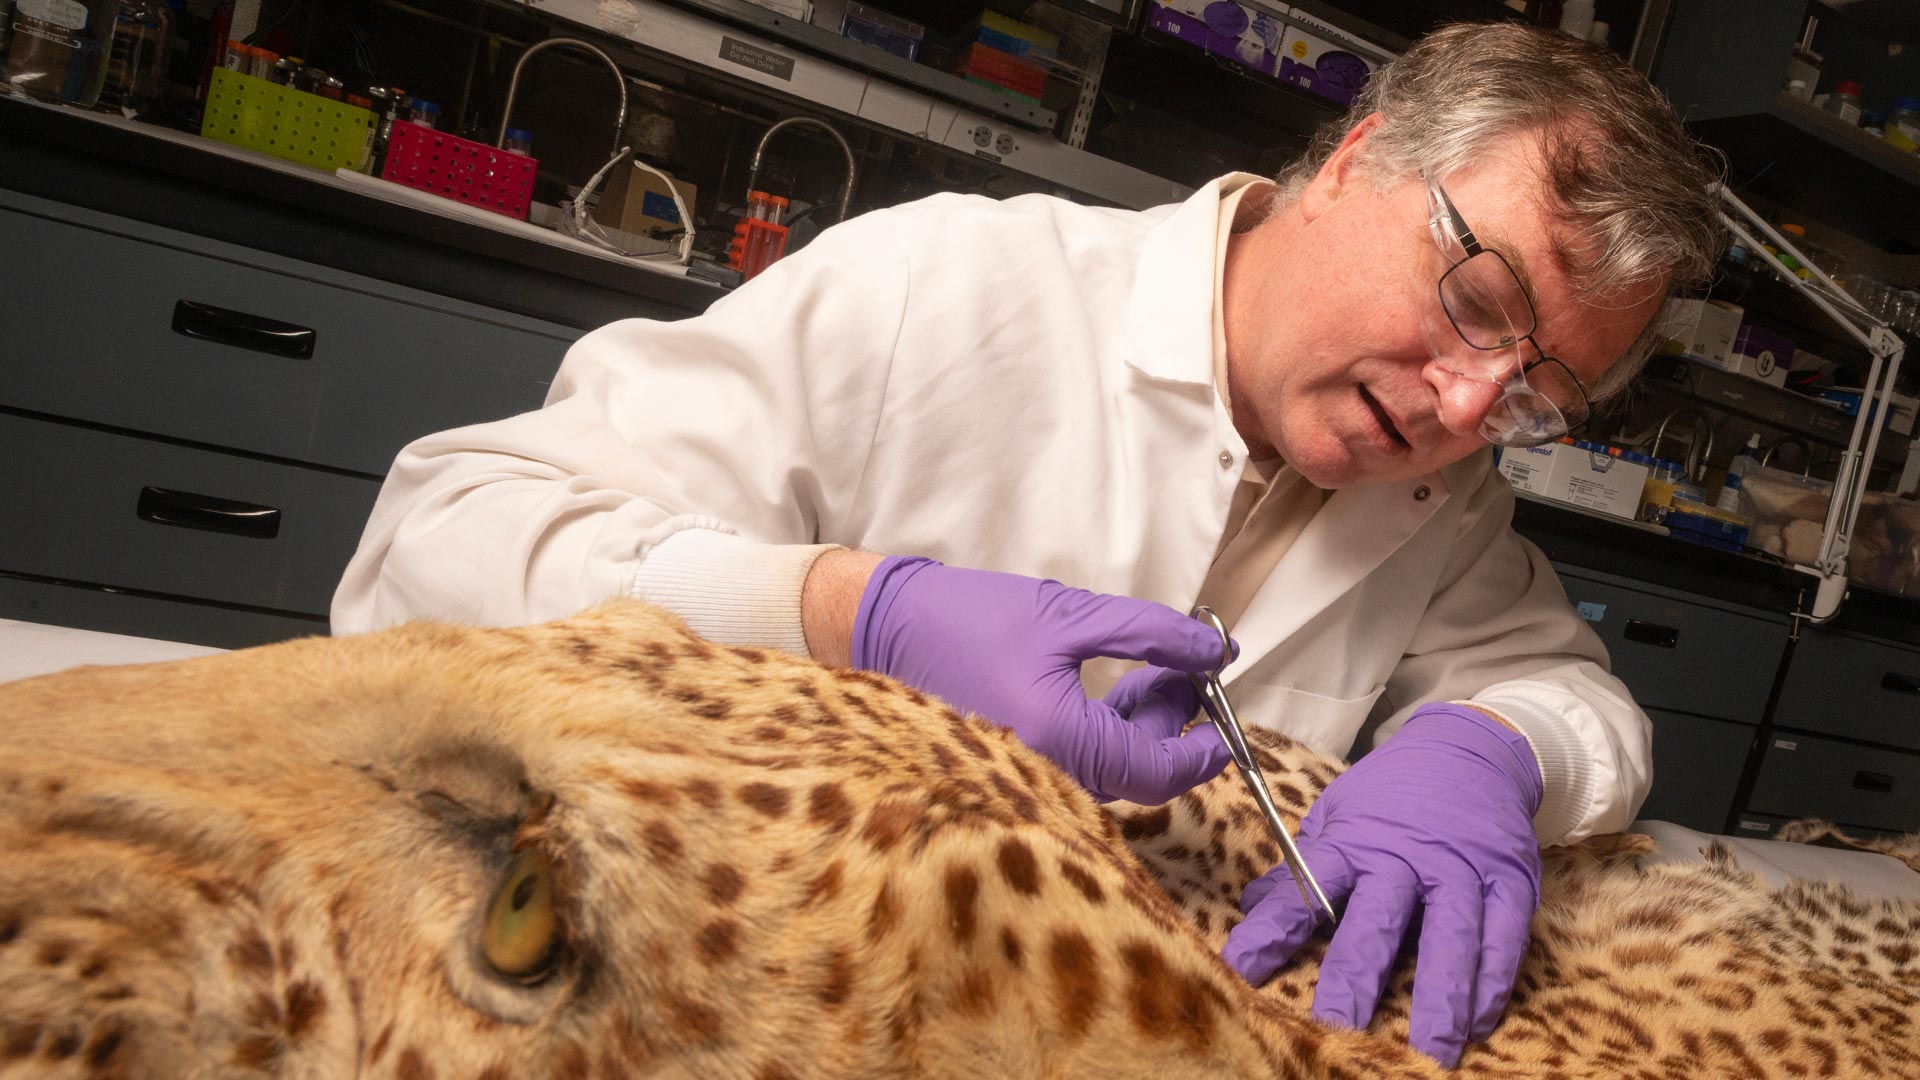 A man wearing a lab coat and purple gloves sits at a table behind a leopard pelt. He is using scissors to cut a portion of the fur.